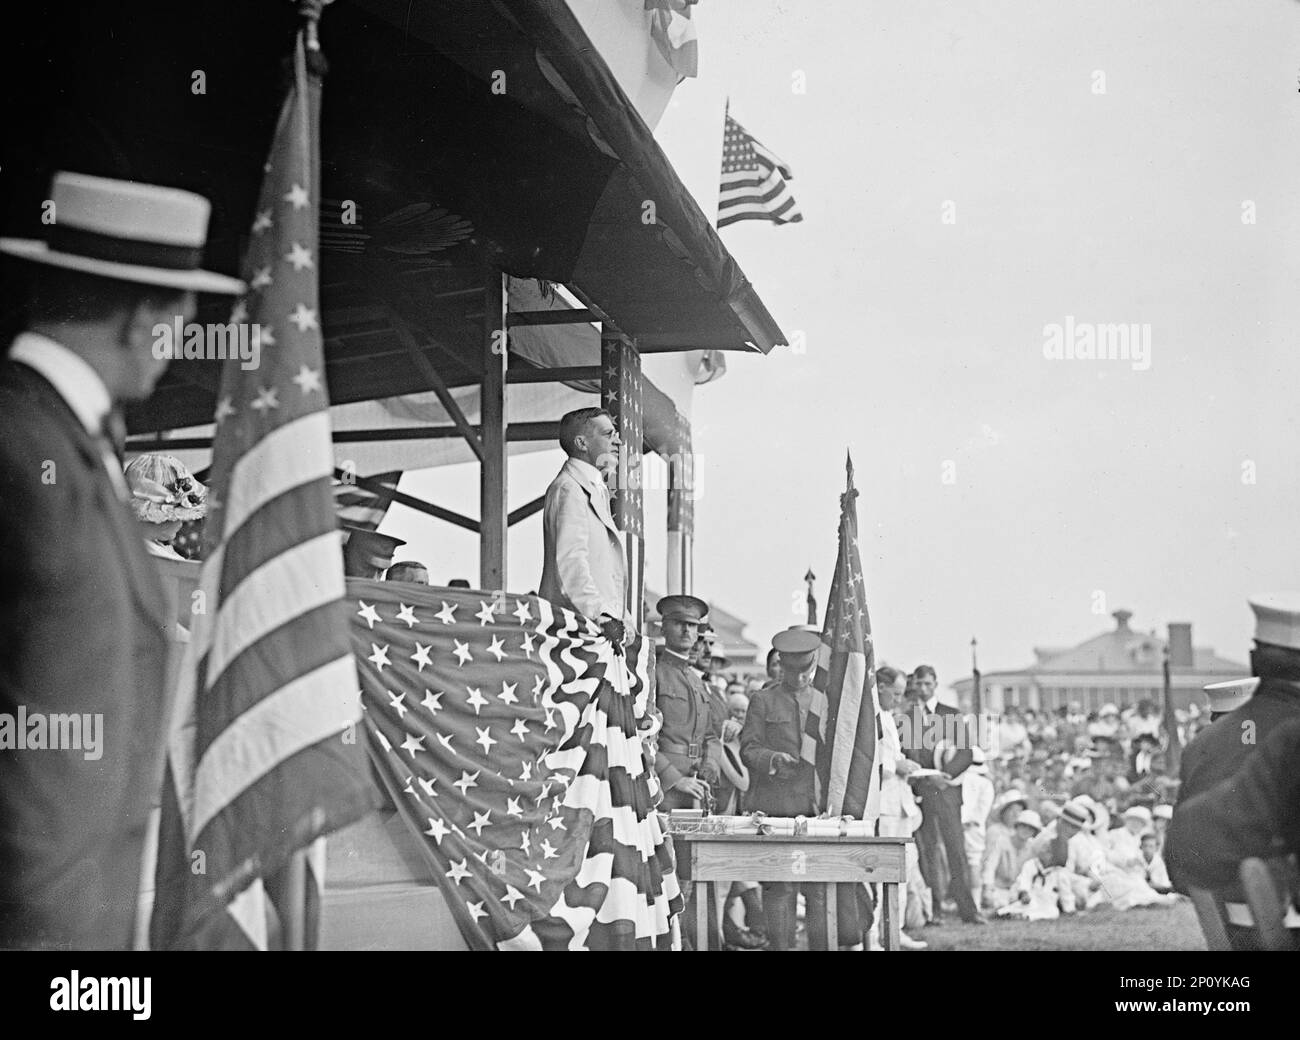 Newton Diehl Baker On Reviewing Stand, 1917 or 1918. US Secretary of War. Stock Photo